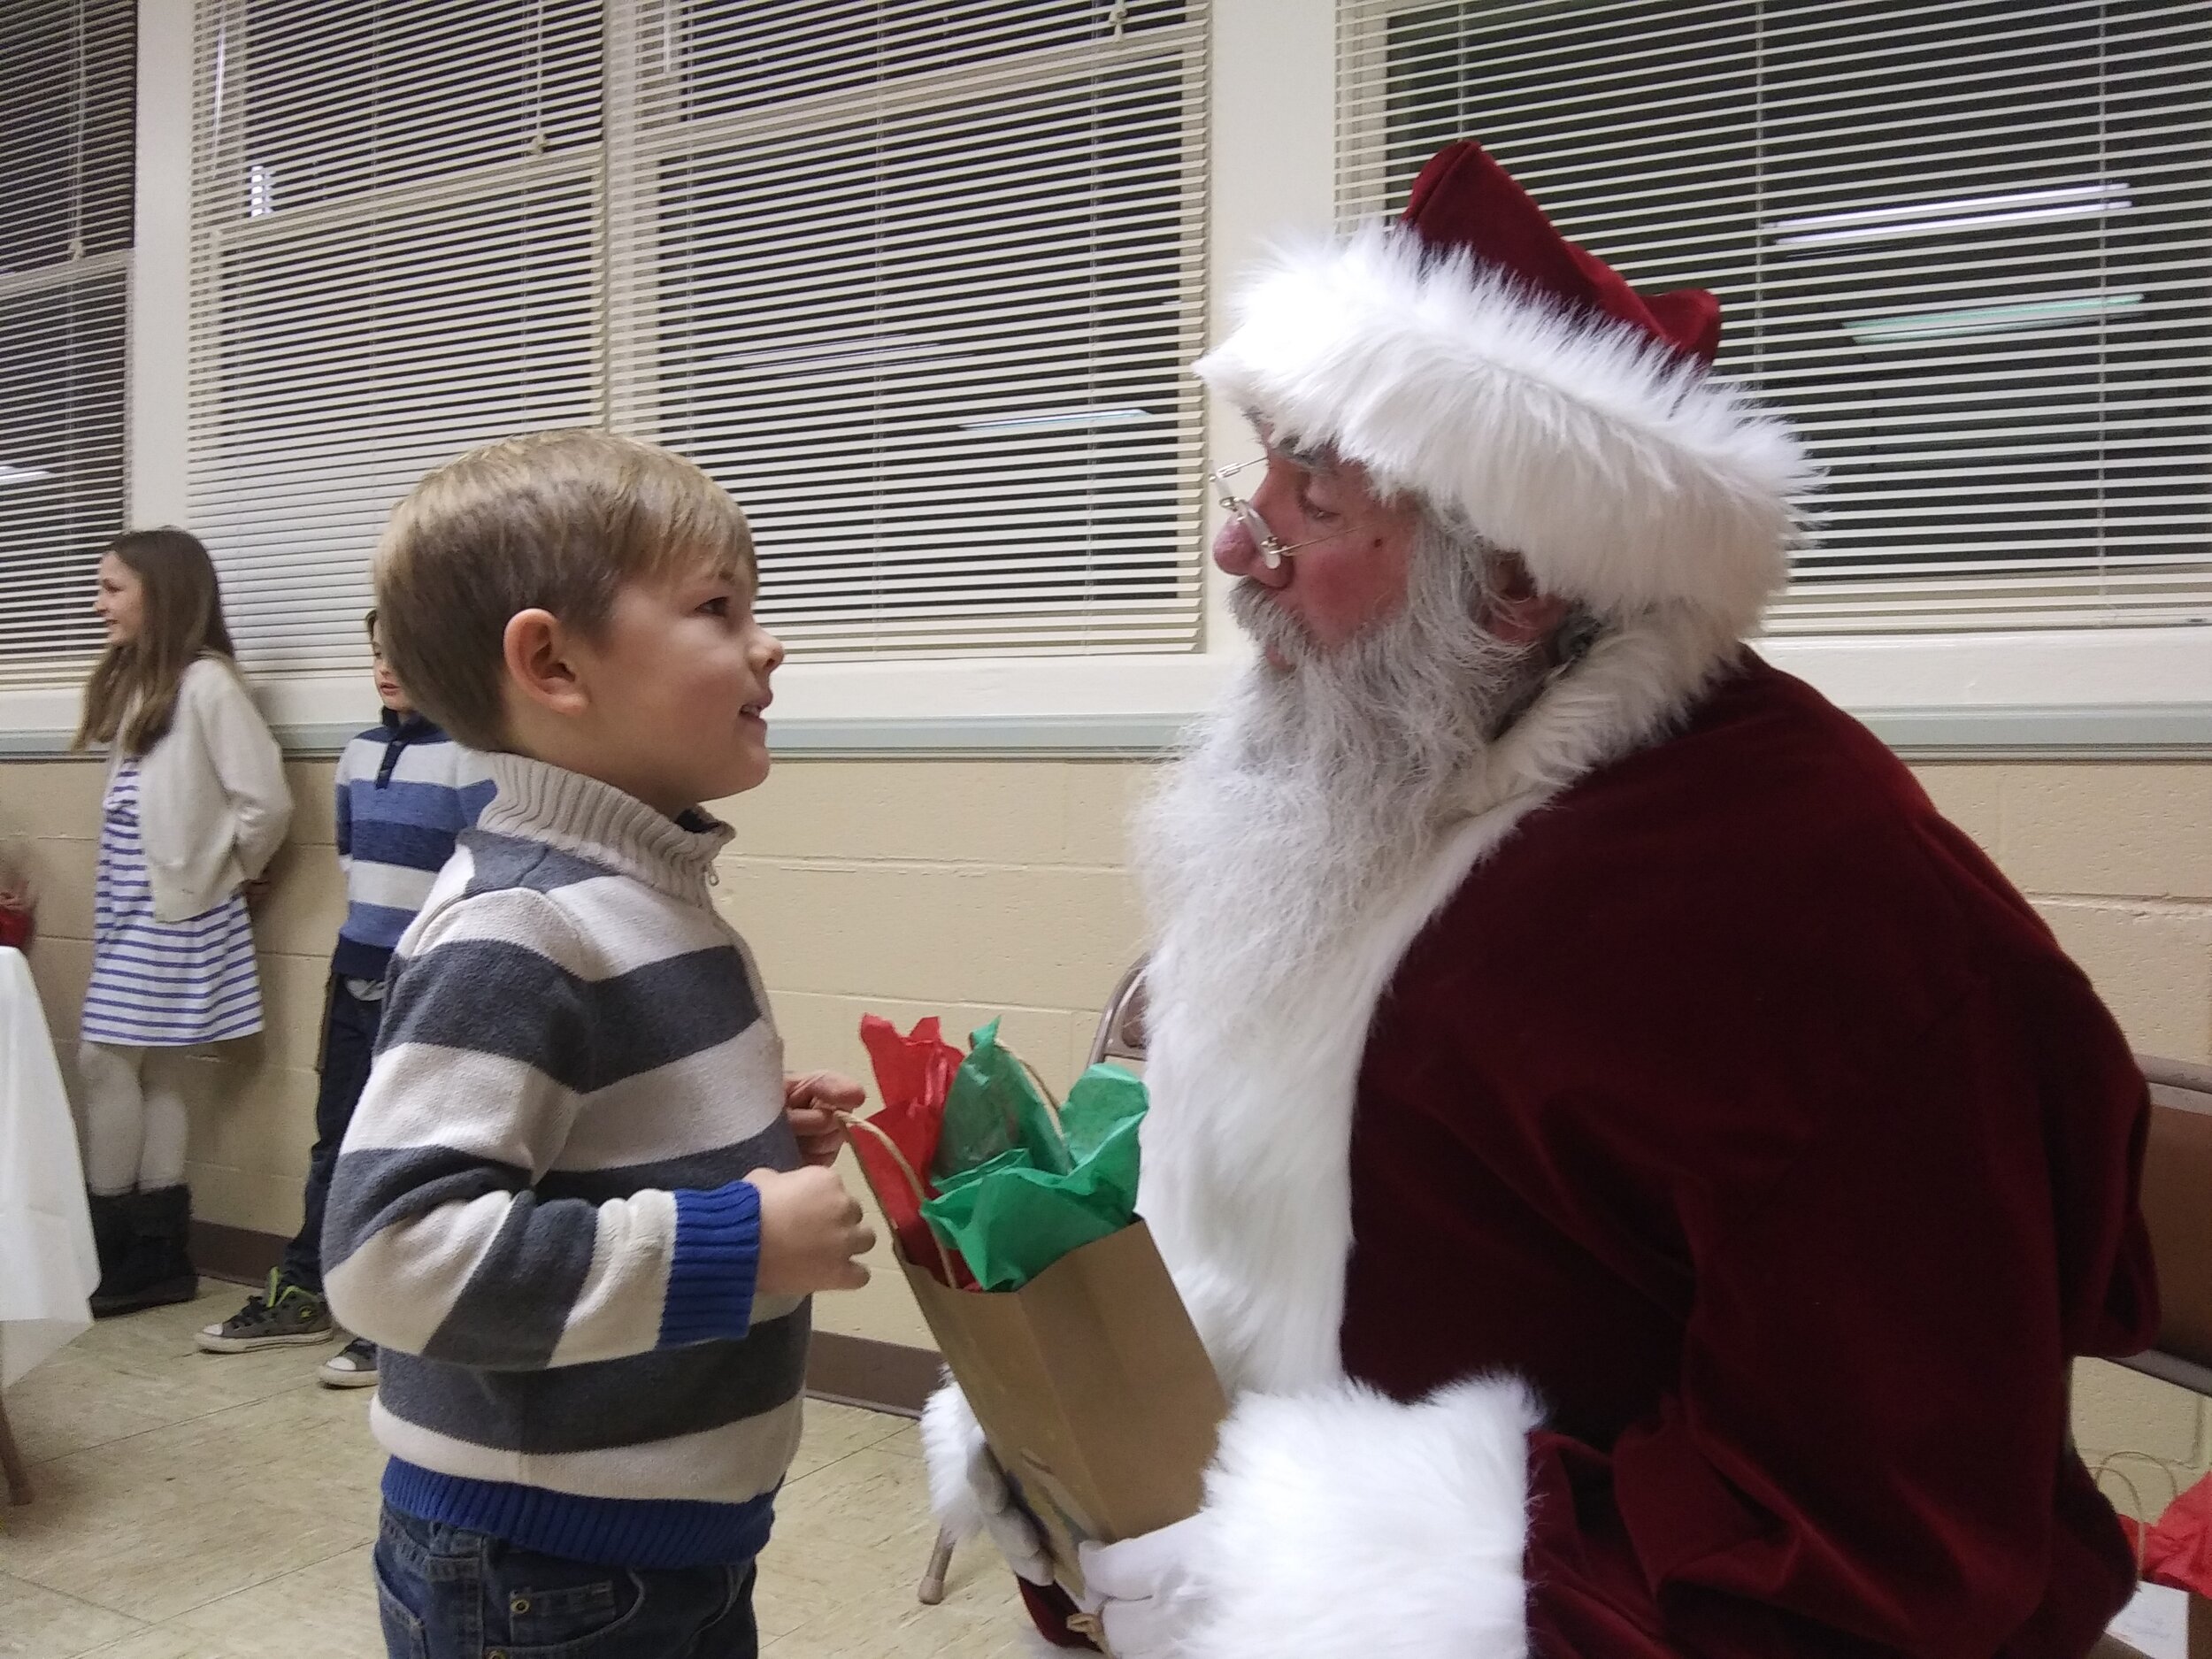  Telling St. Nick that he “needs Legos.” 